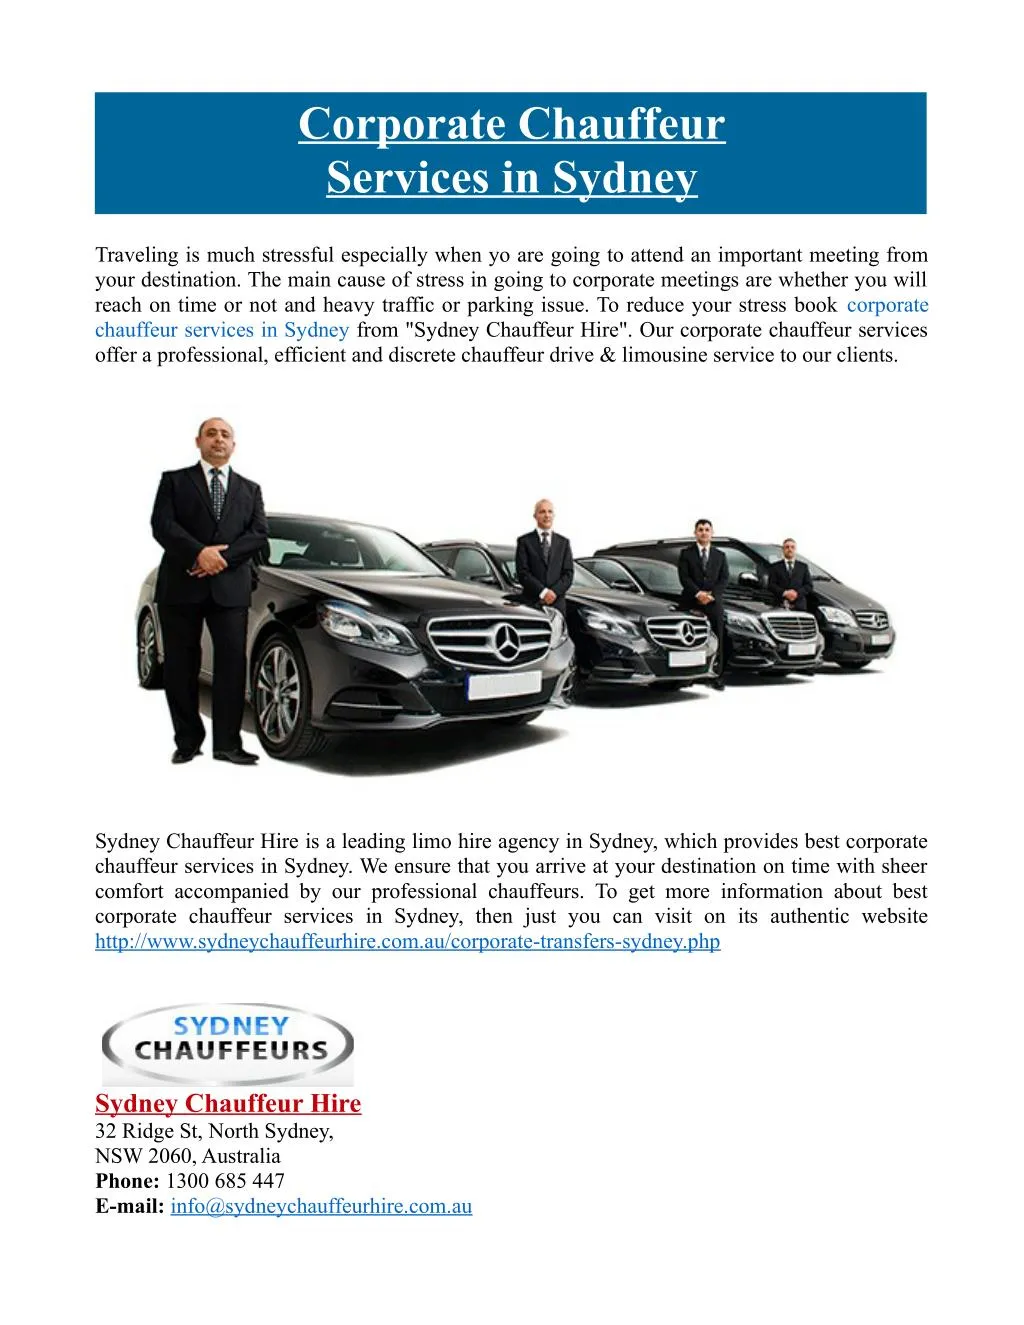 corporate chauffeur services in sydney n.